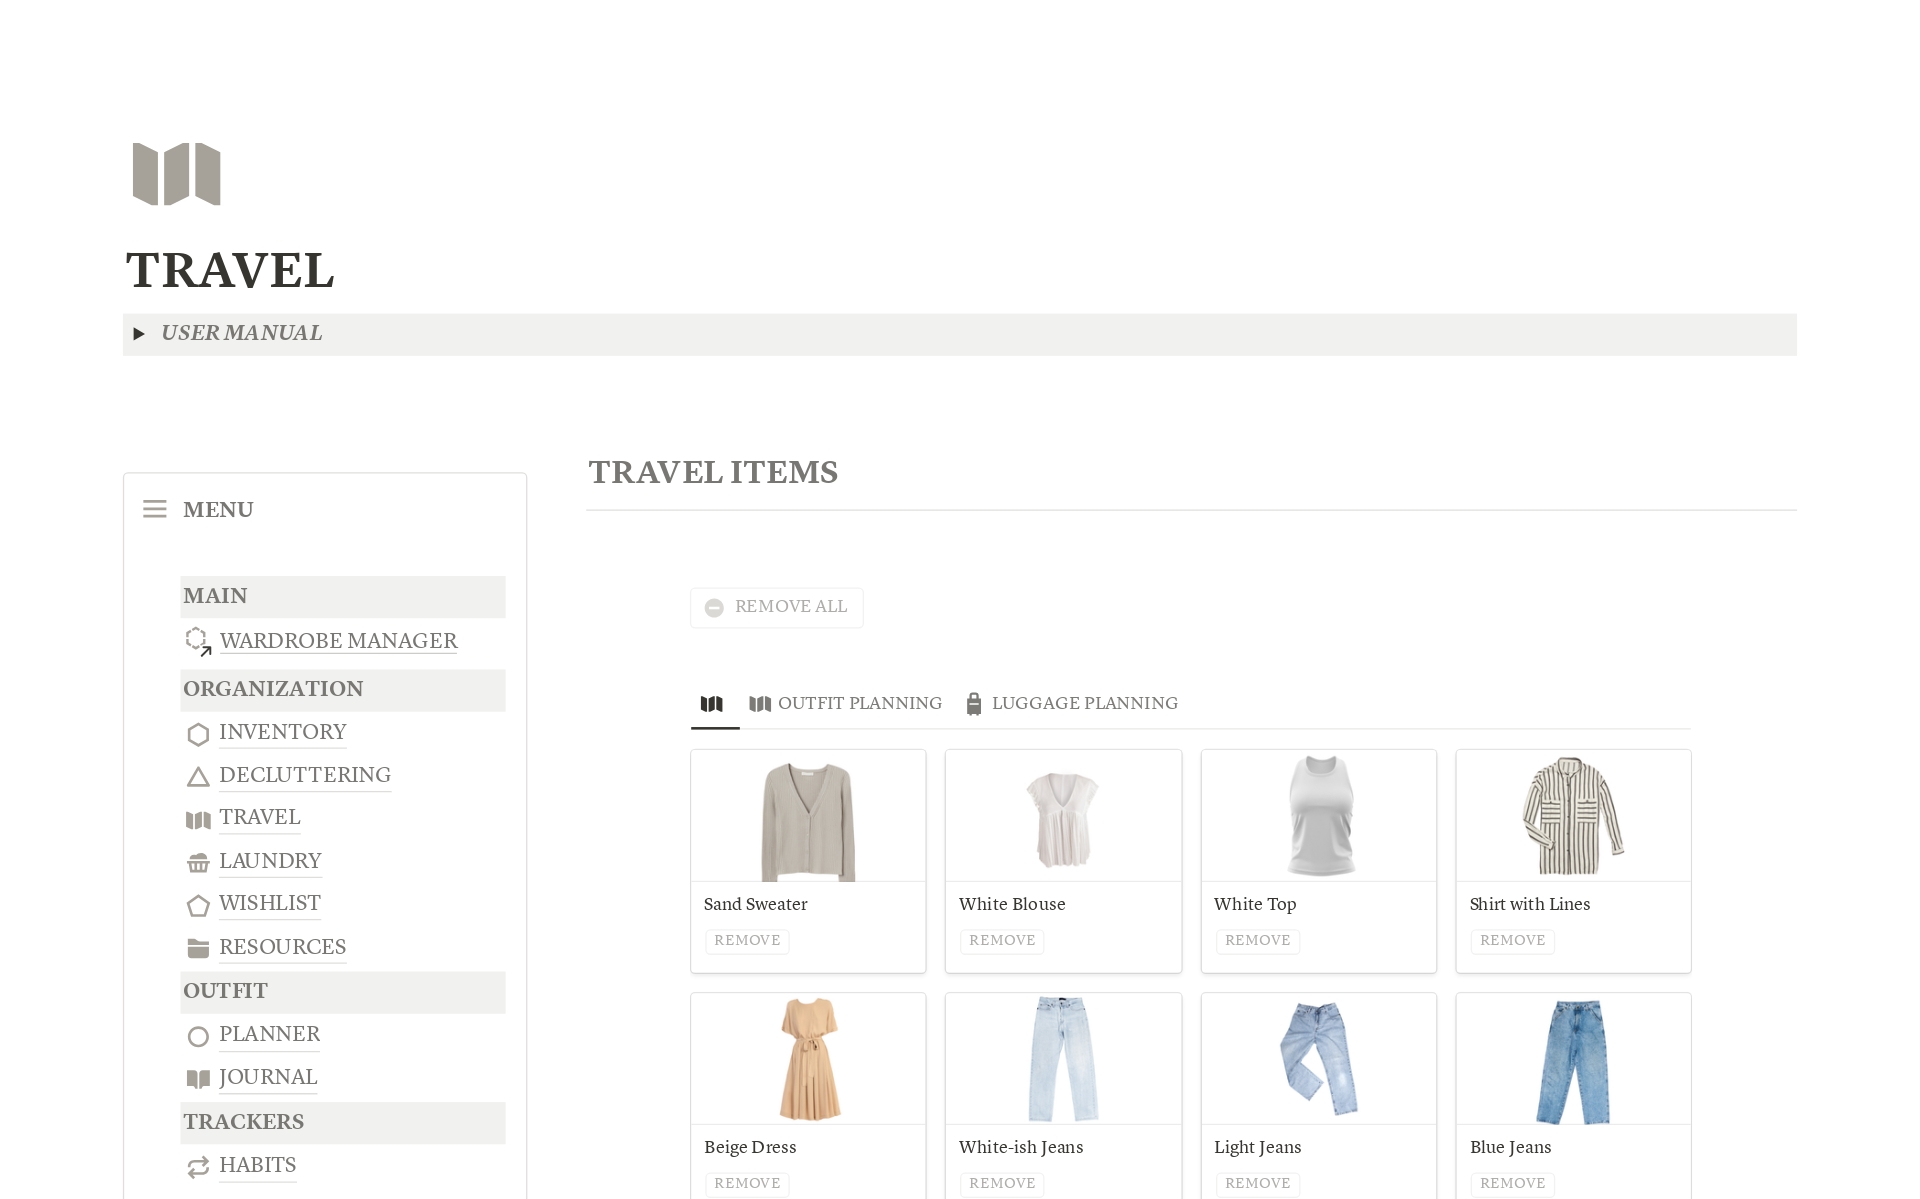 Streamline your wardrobe with our Wardrobe Manager. Easily categorize clothes, plan weekly outfits, and track style choices. Smart decluttering and spending tracking included. Manage laundry and travel outfits all in one place!